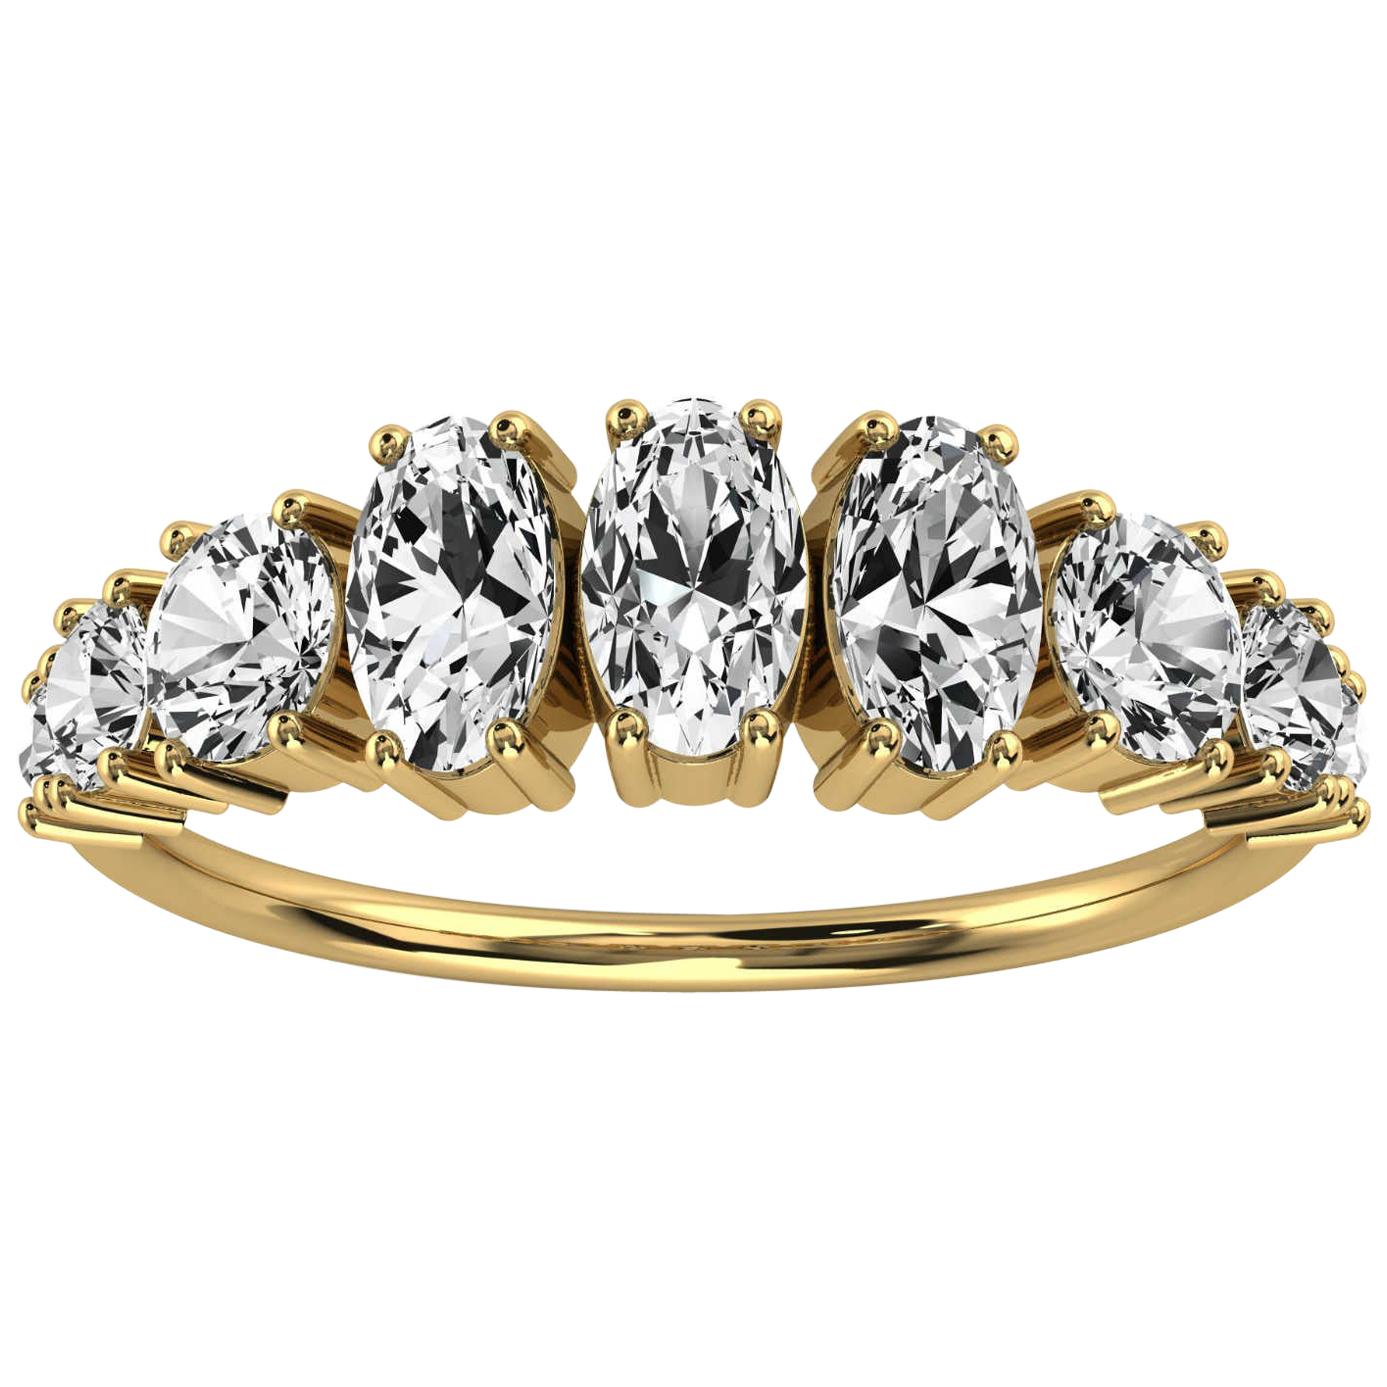 14k Yellow Gold Kym Oval and Round Organic Design Diamond Ring '1 1/4 Ct. Tw' For Sale